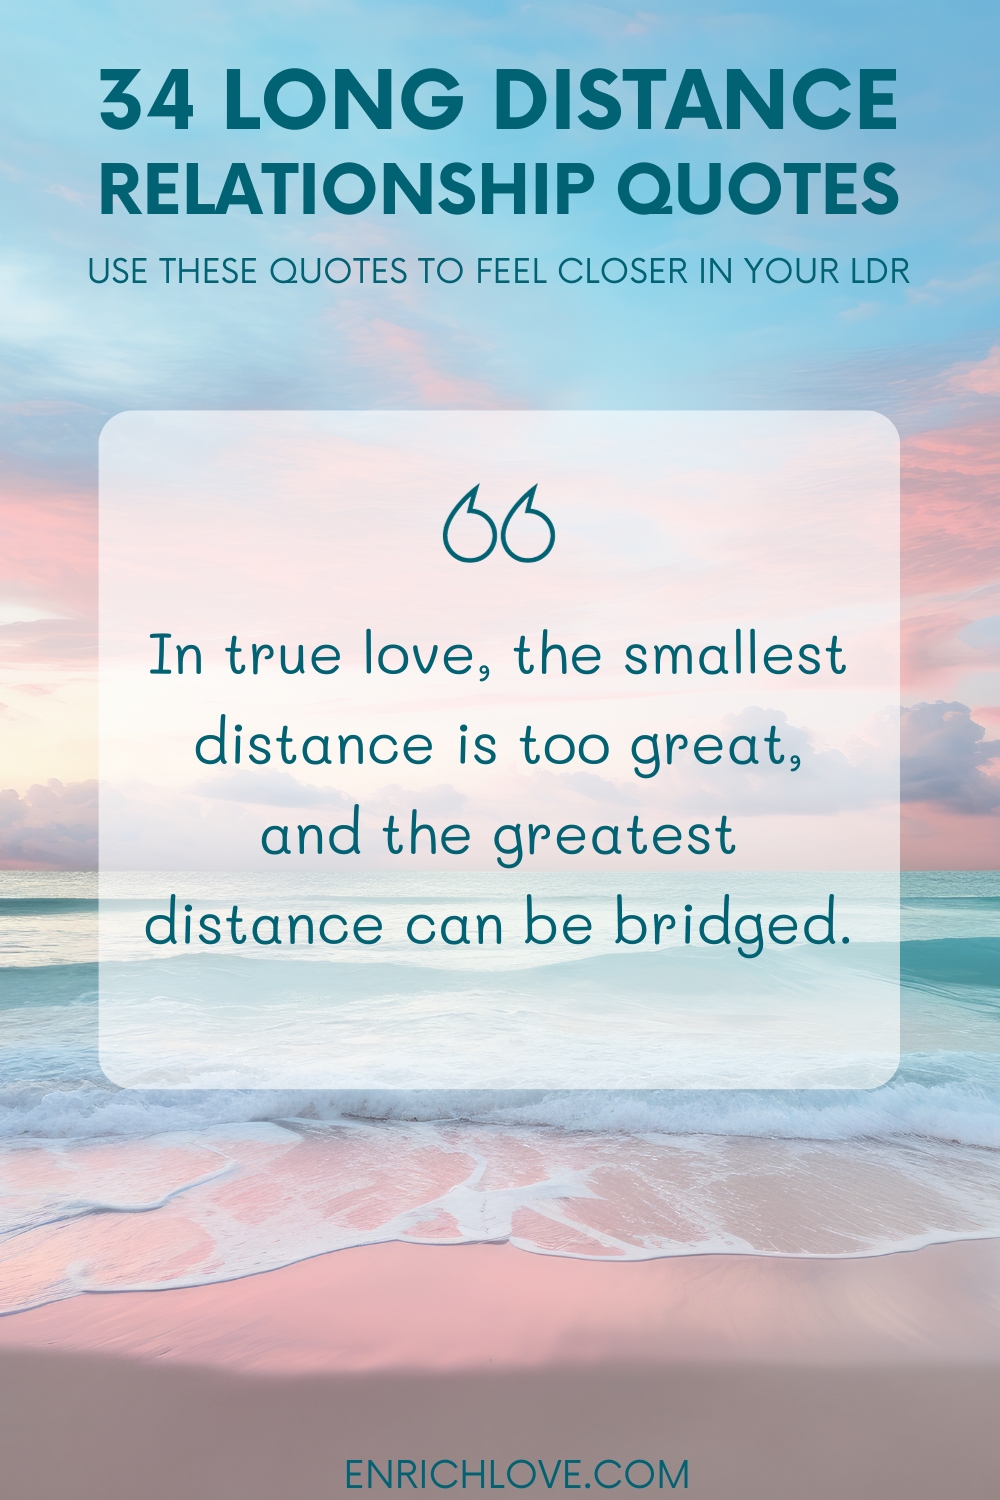 34 Long Distance Relationship Quotes - In true love, the smallest distance is too great, and the greatest distance can be bridged.